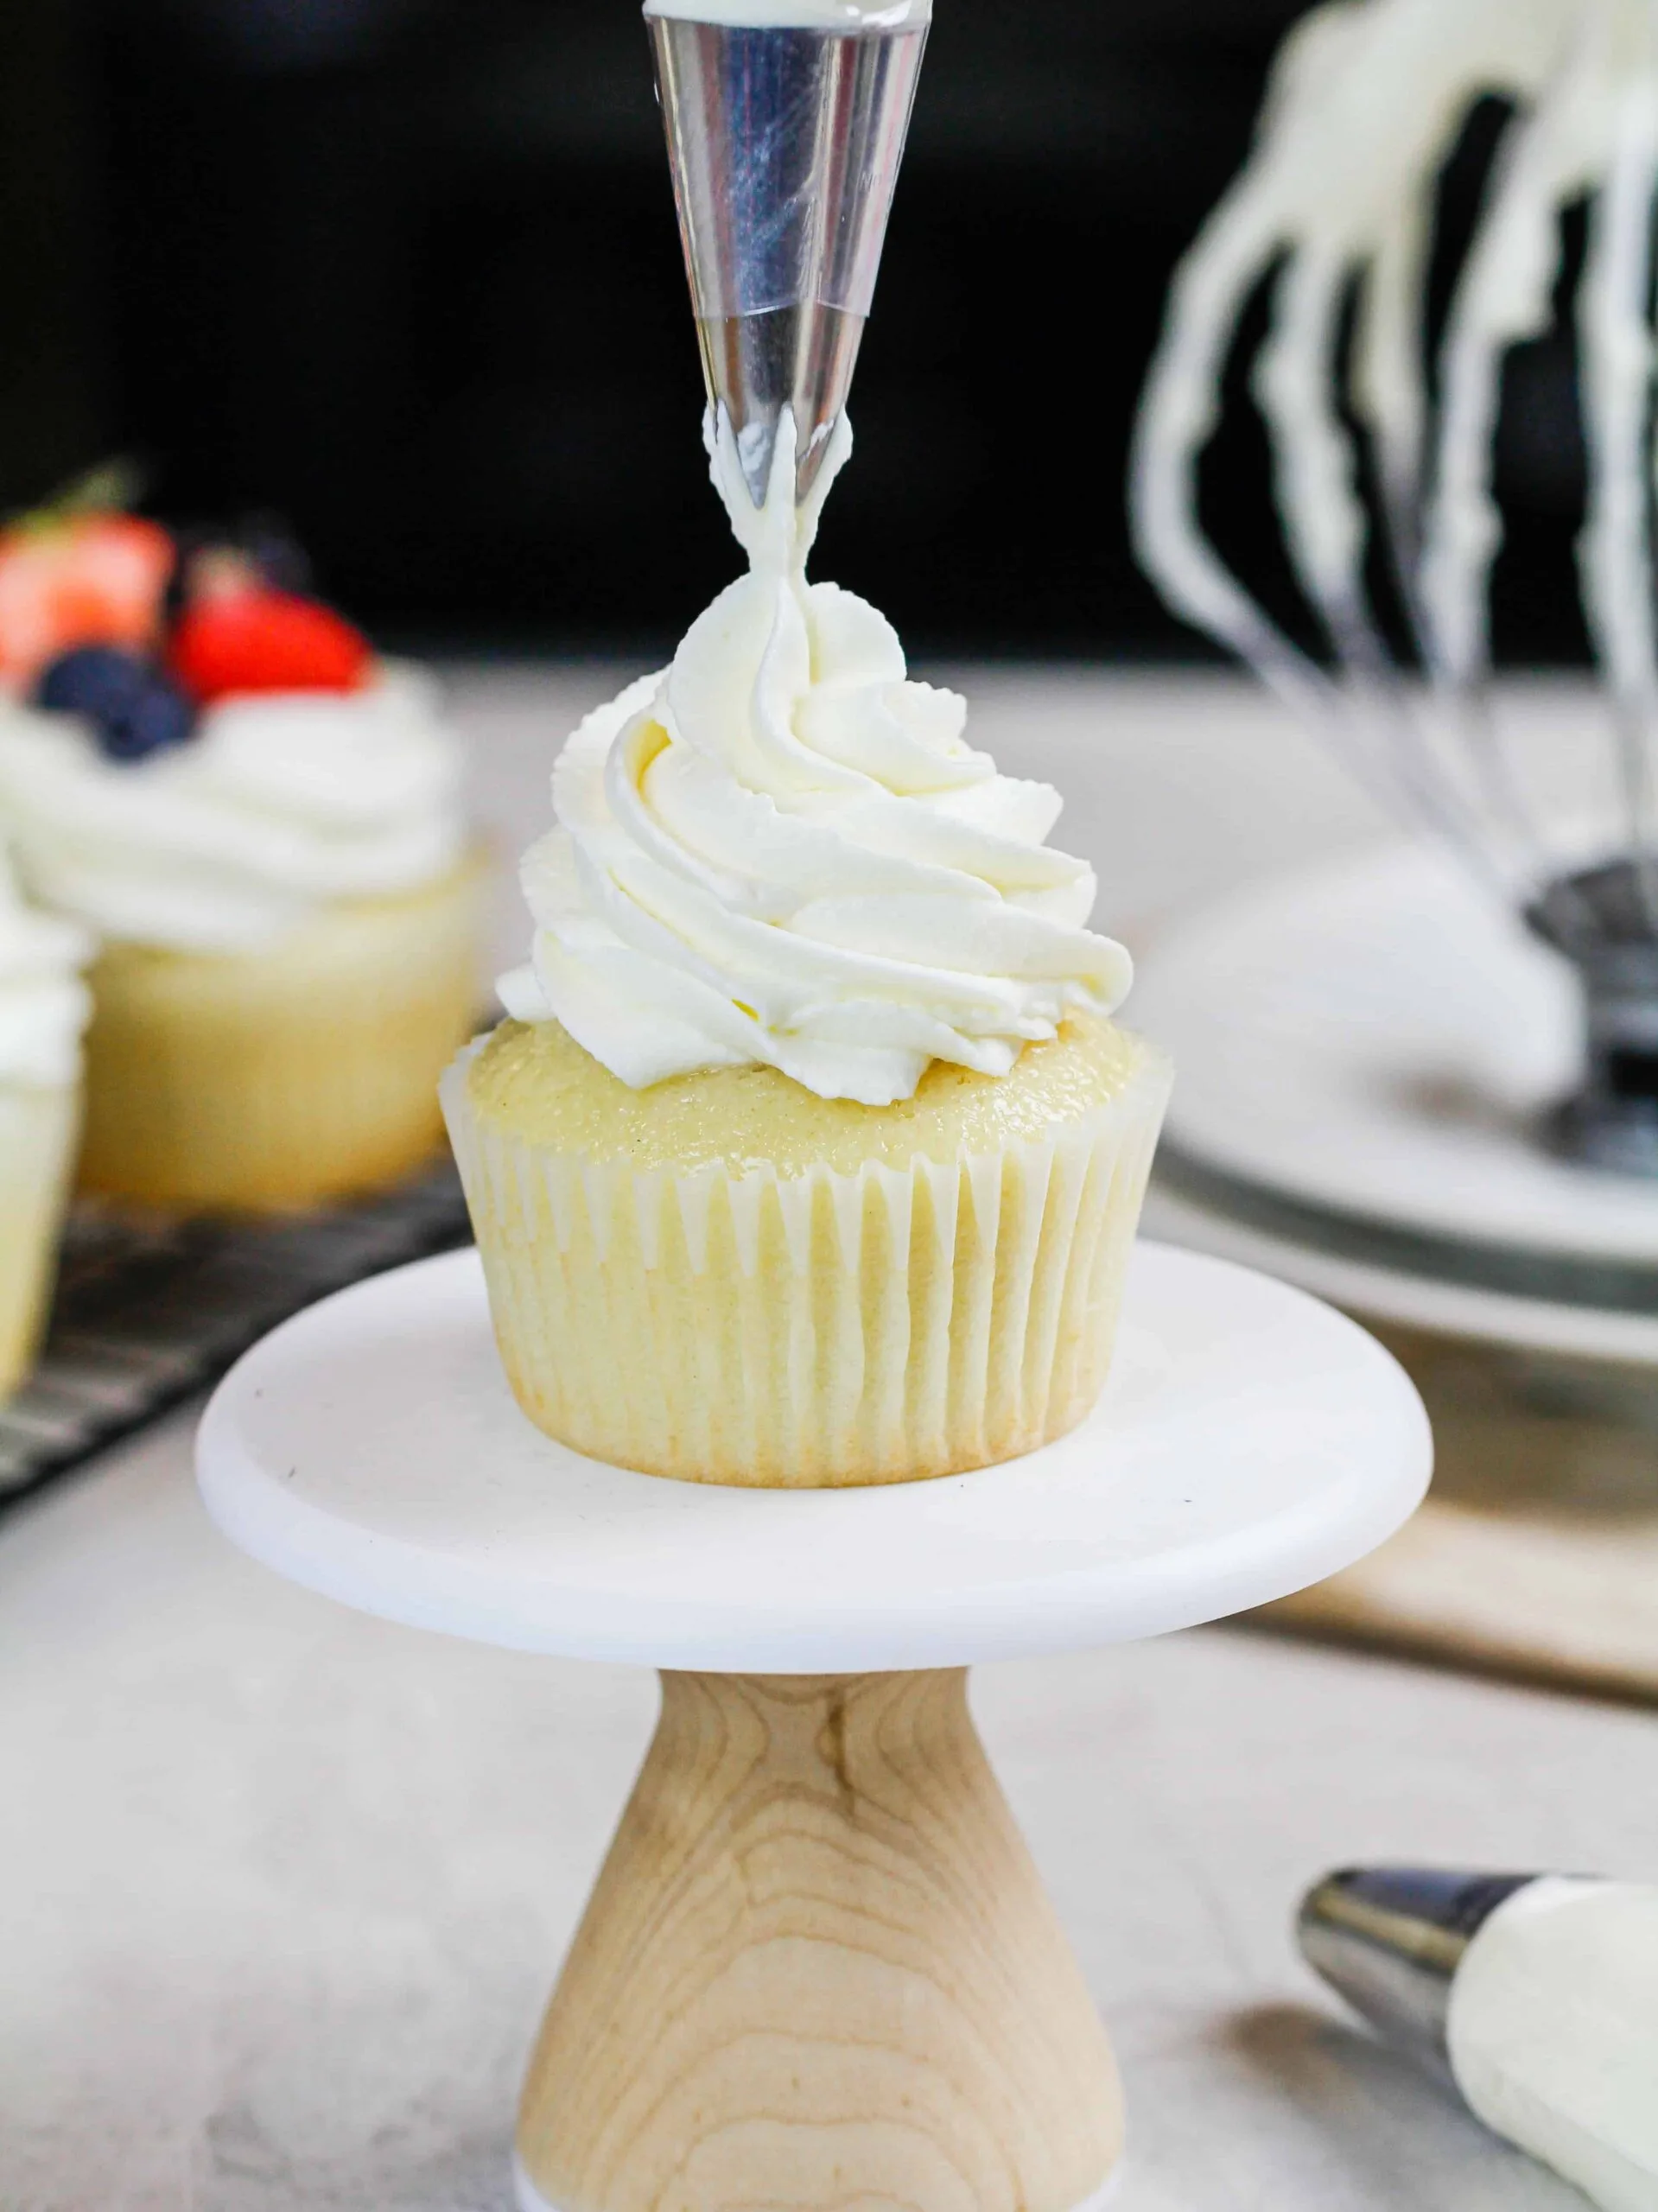 image of stabilized whipped cream frosting made with cream cheese being piped onto a cupcake